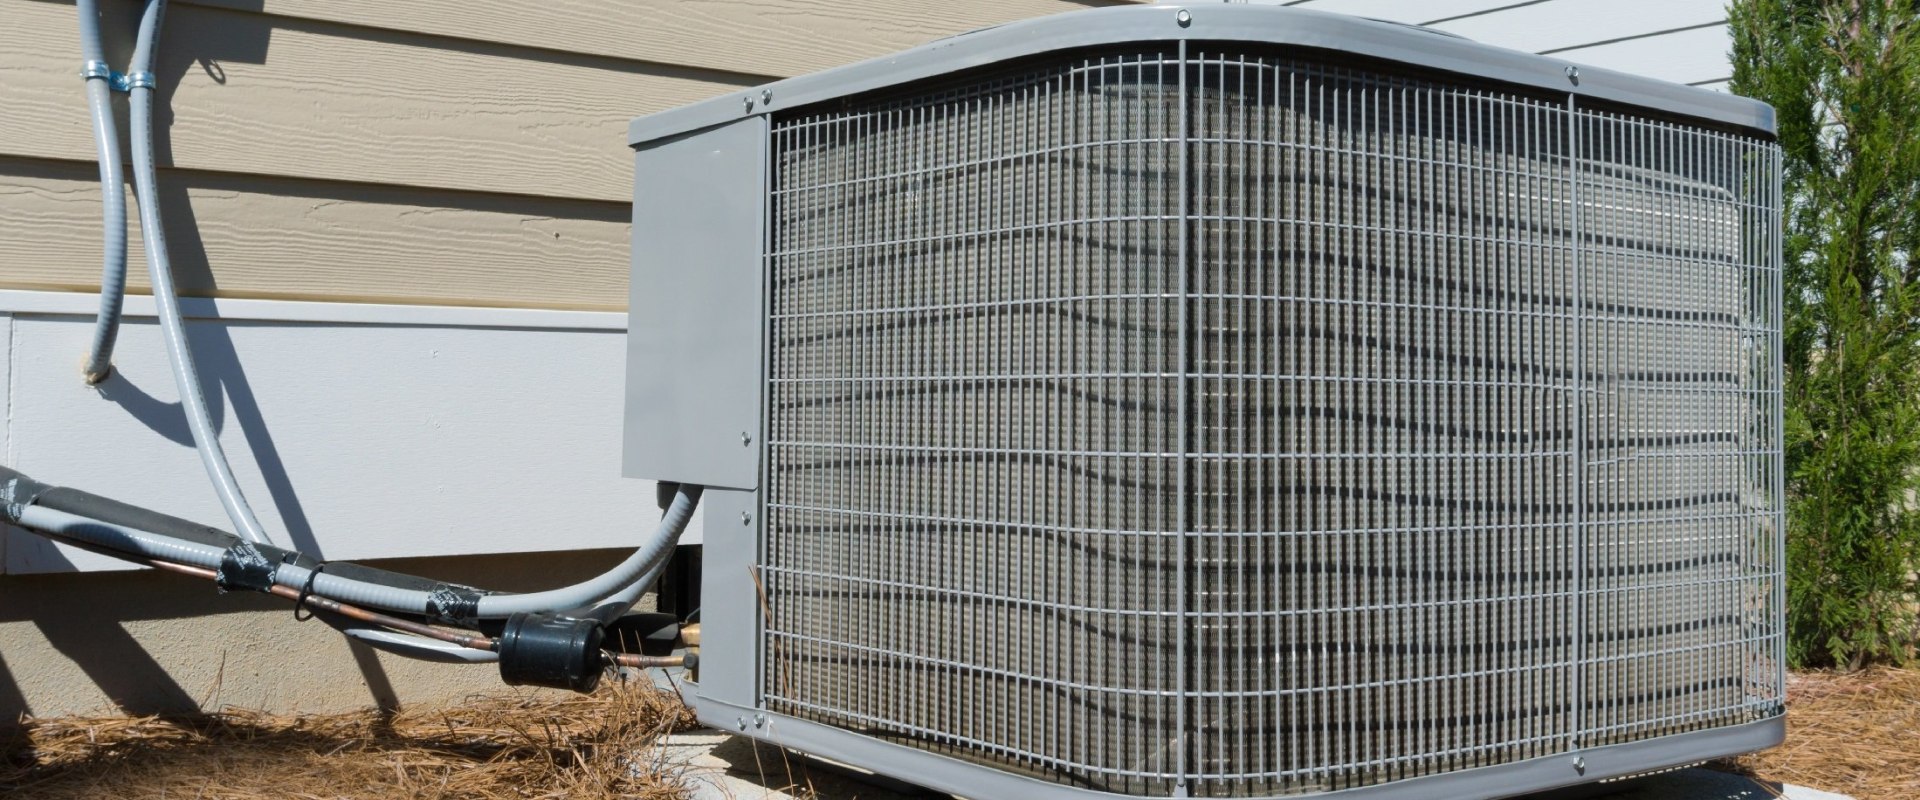 Common Air Conditioner Problems and How to Fix Them